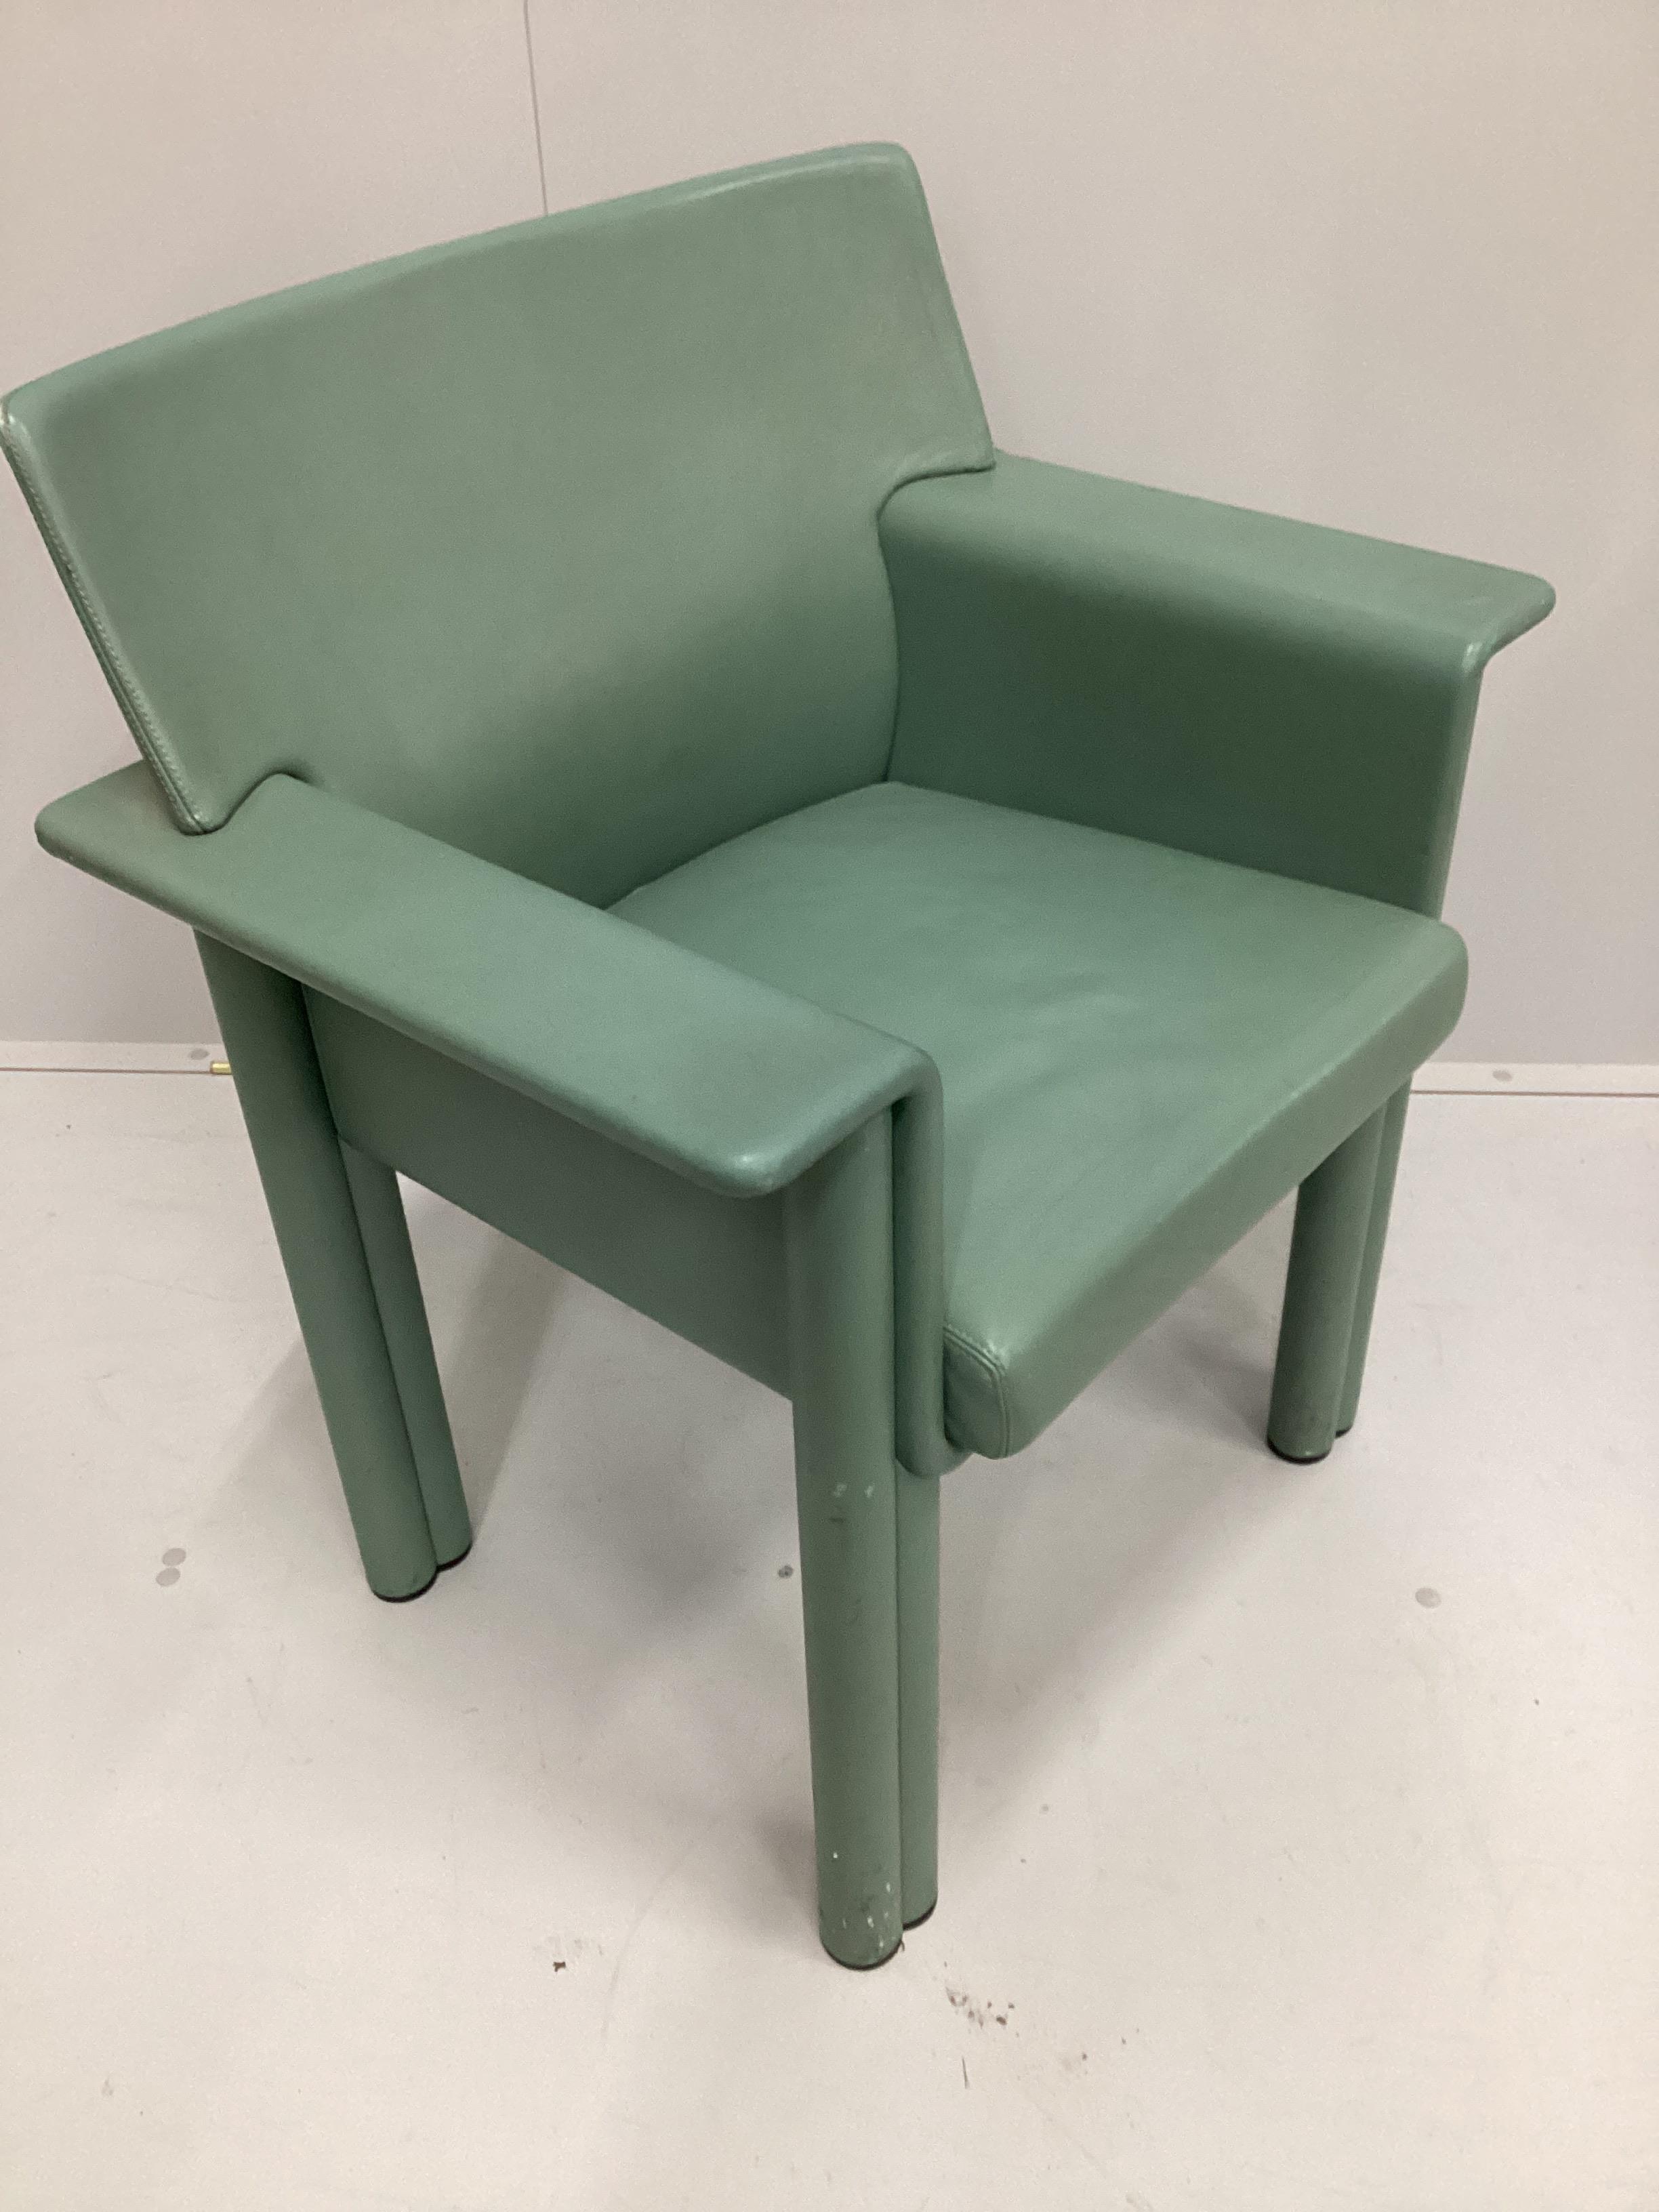 Afra and Tobia Scarpa, an Italian green leather chair by Meritalia, width 71cm, depth 48cm, height 81cm.